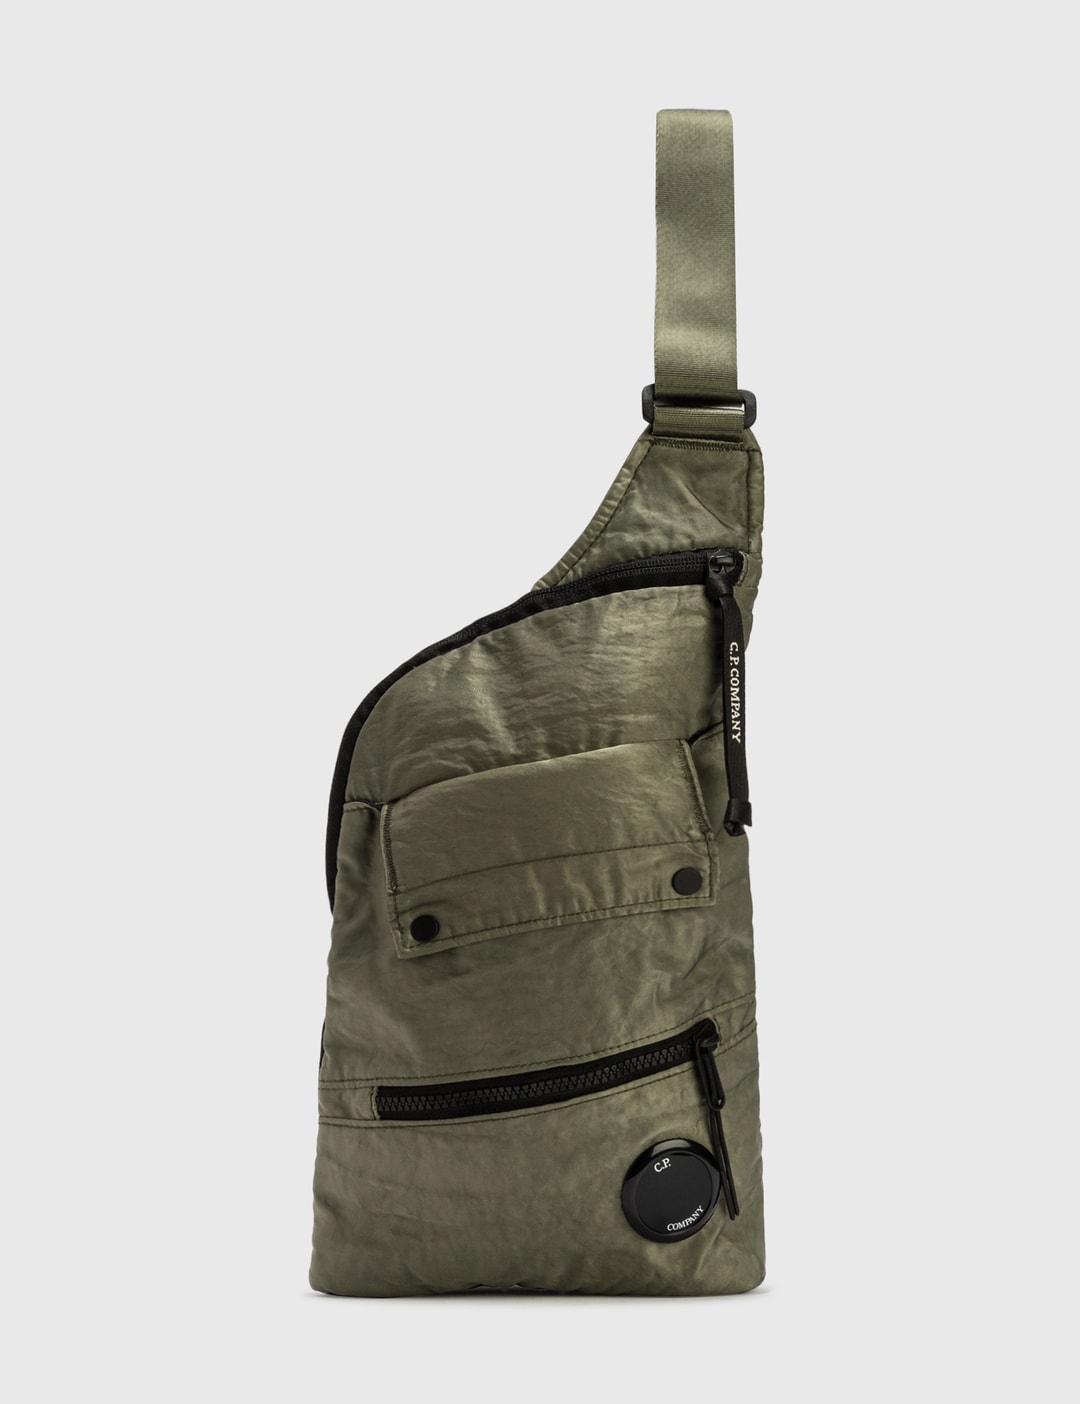 C.P. Company - NYLON B CROSSBODY BAG  HBX - Globally Curated Fashion and  Lifestyle by Hypebeast